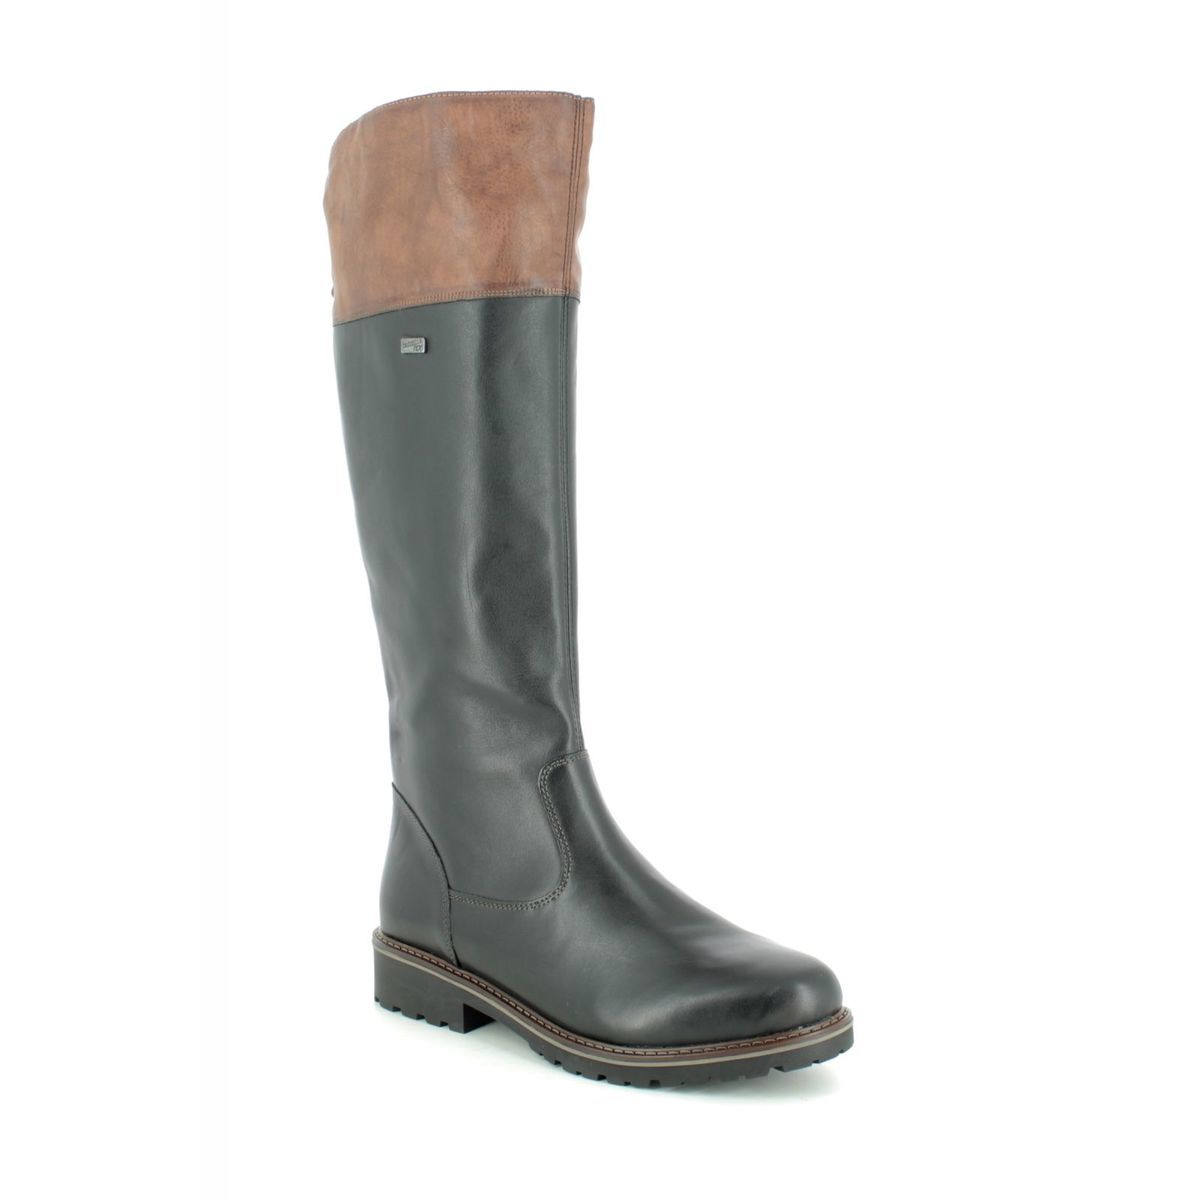 Remonte Indah Tex Black Leather Womens Knee-High Boots R6581-02 In Size 37 In Plain Black Leather